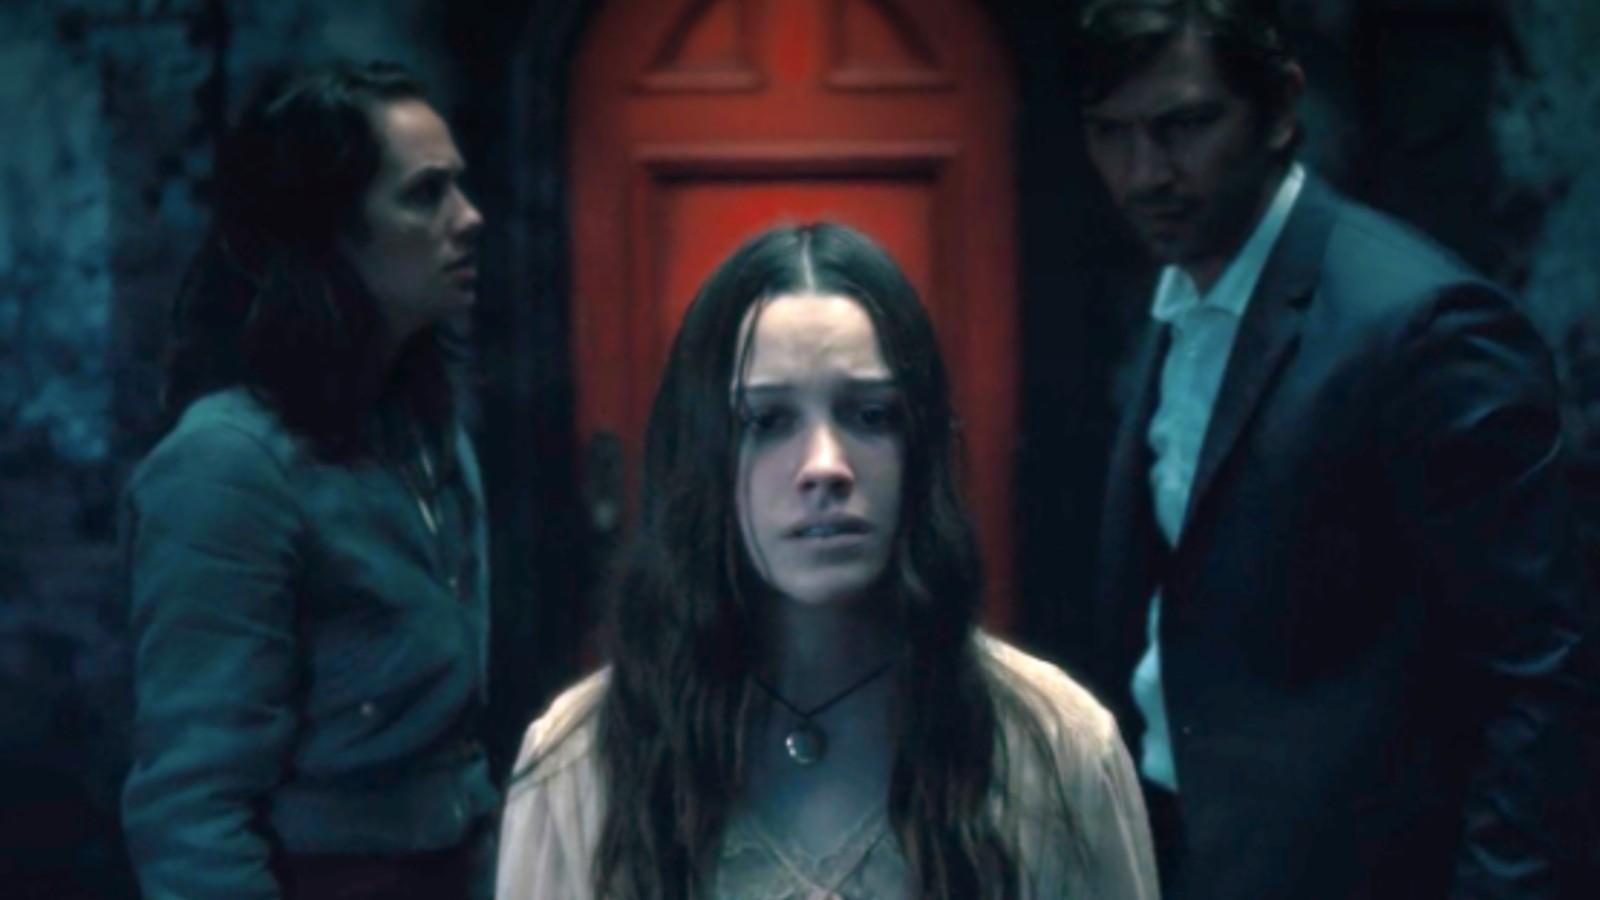 Victoria Pedretti as Nell Crain in The Haunting of Hill House